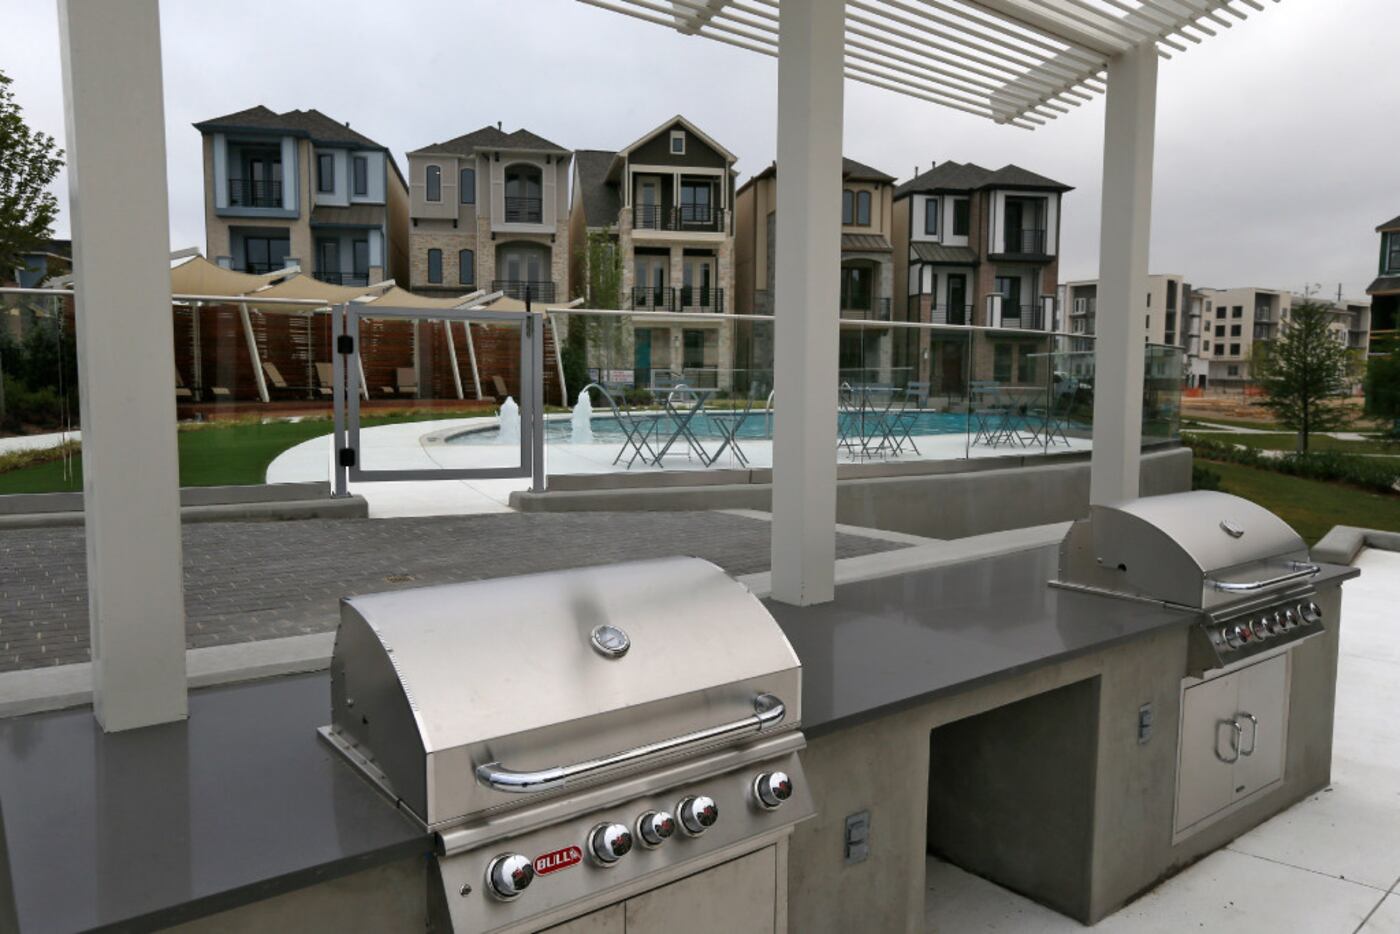 Outdoor grills at Merion at Midtown Park.